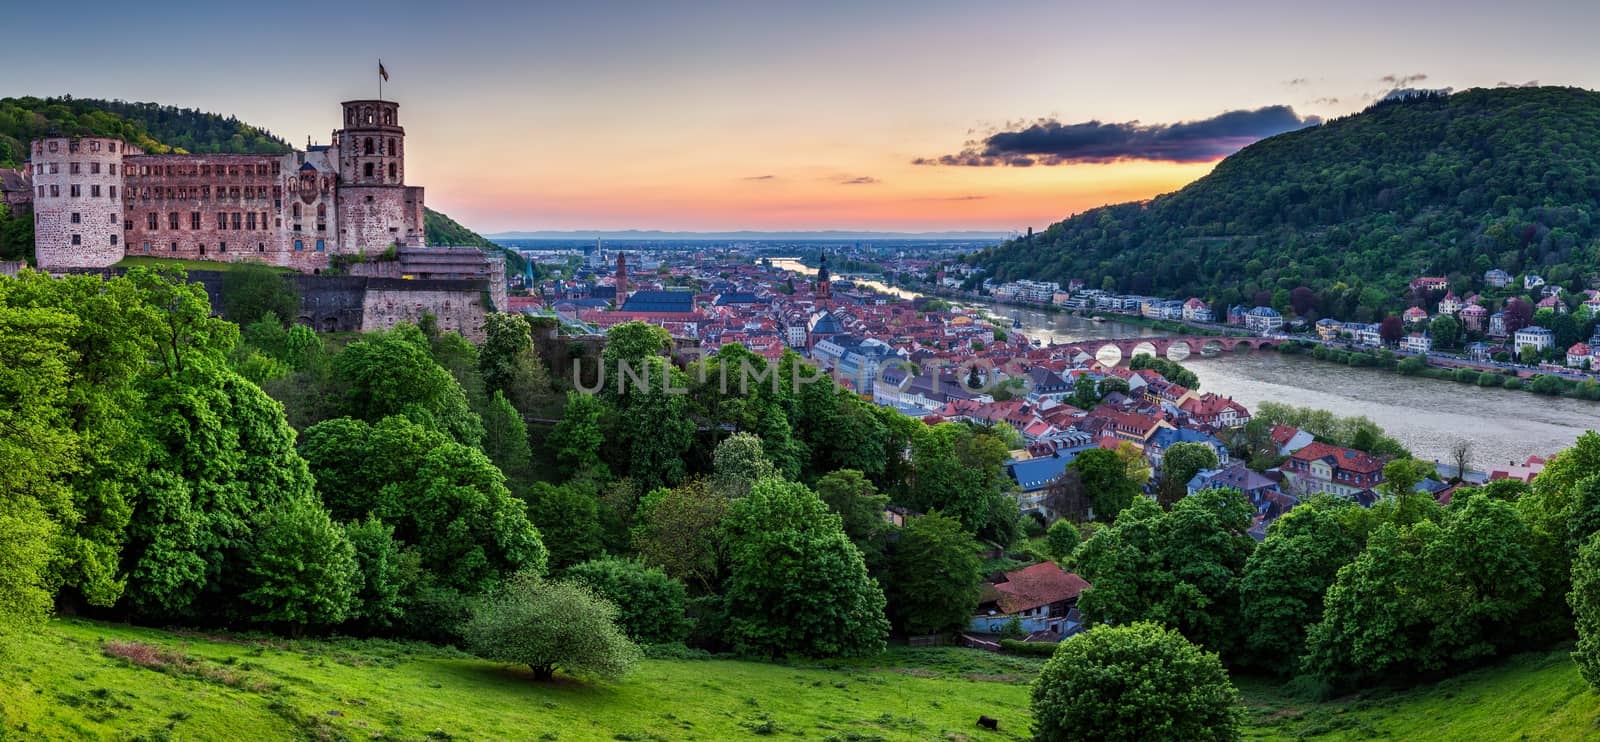 Panoramic view of beautiful medieval town Heidelberg including C by DaLiu